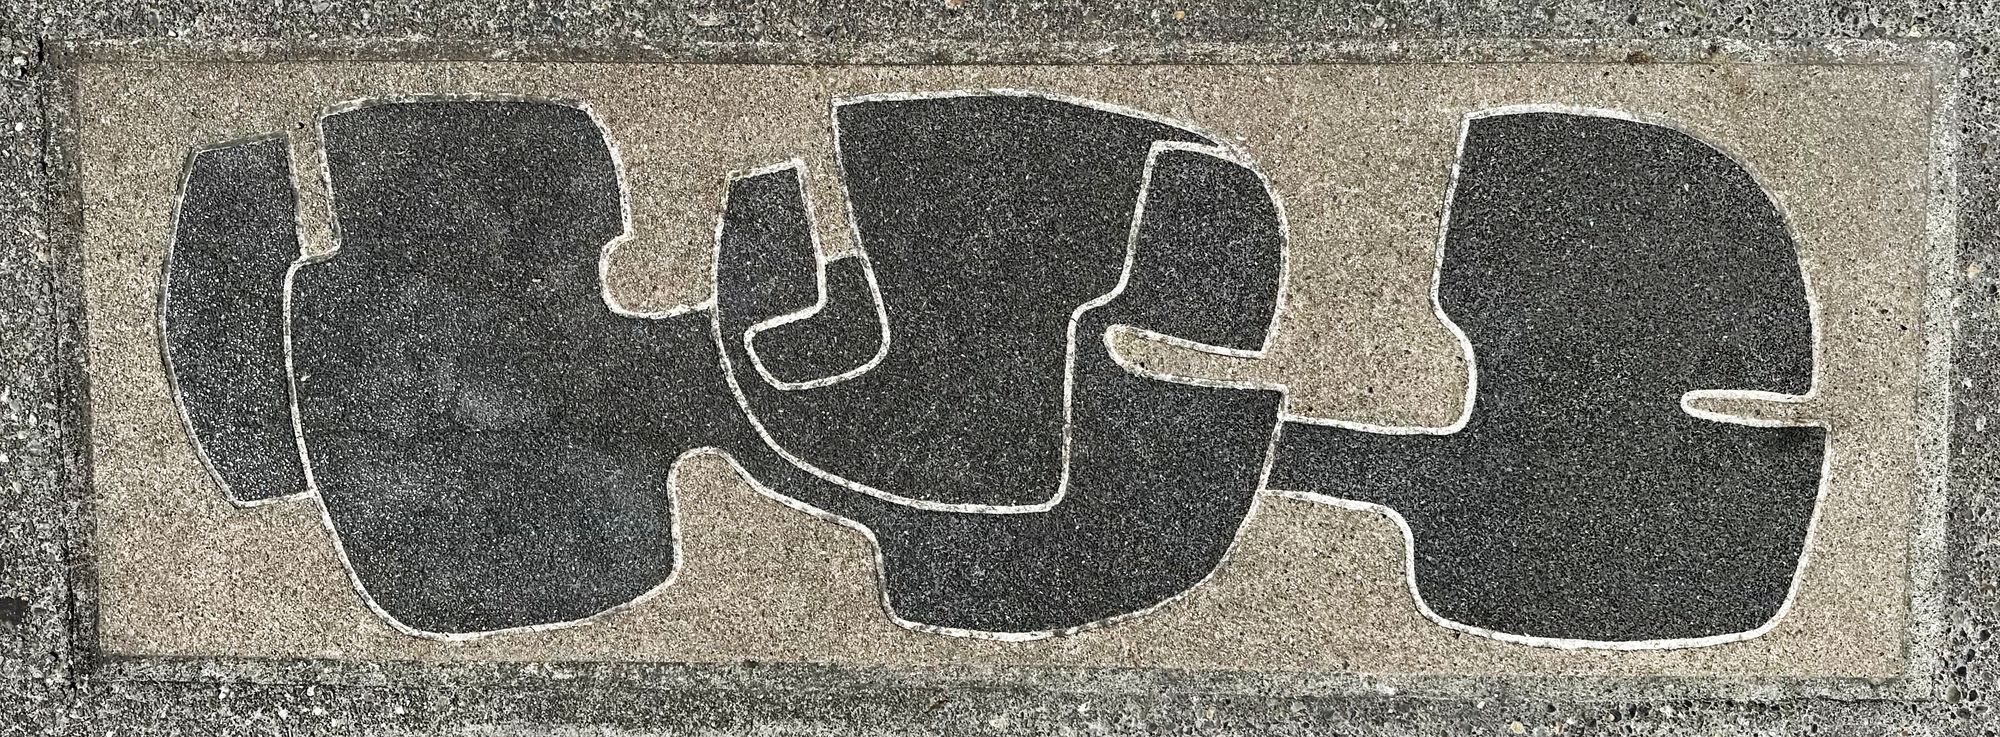 Photo of concrete art work by Guy Anderson, by David Bilides